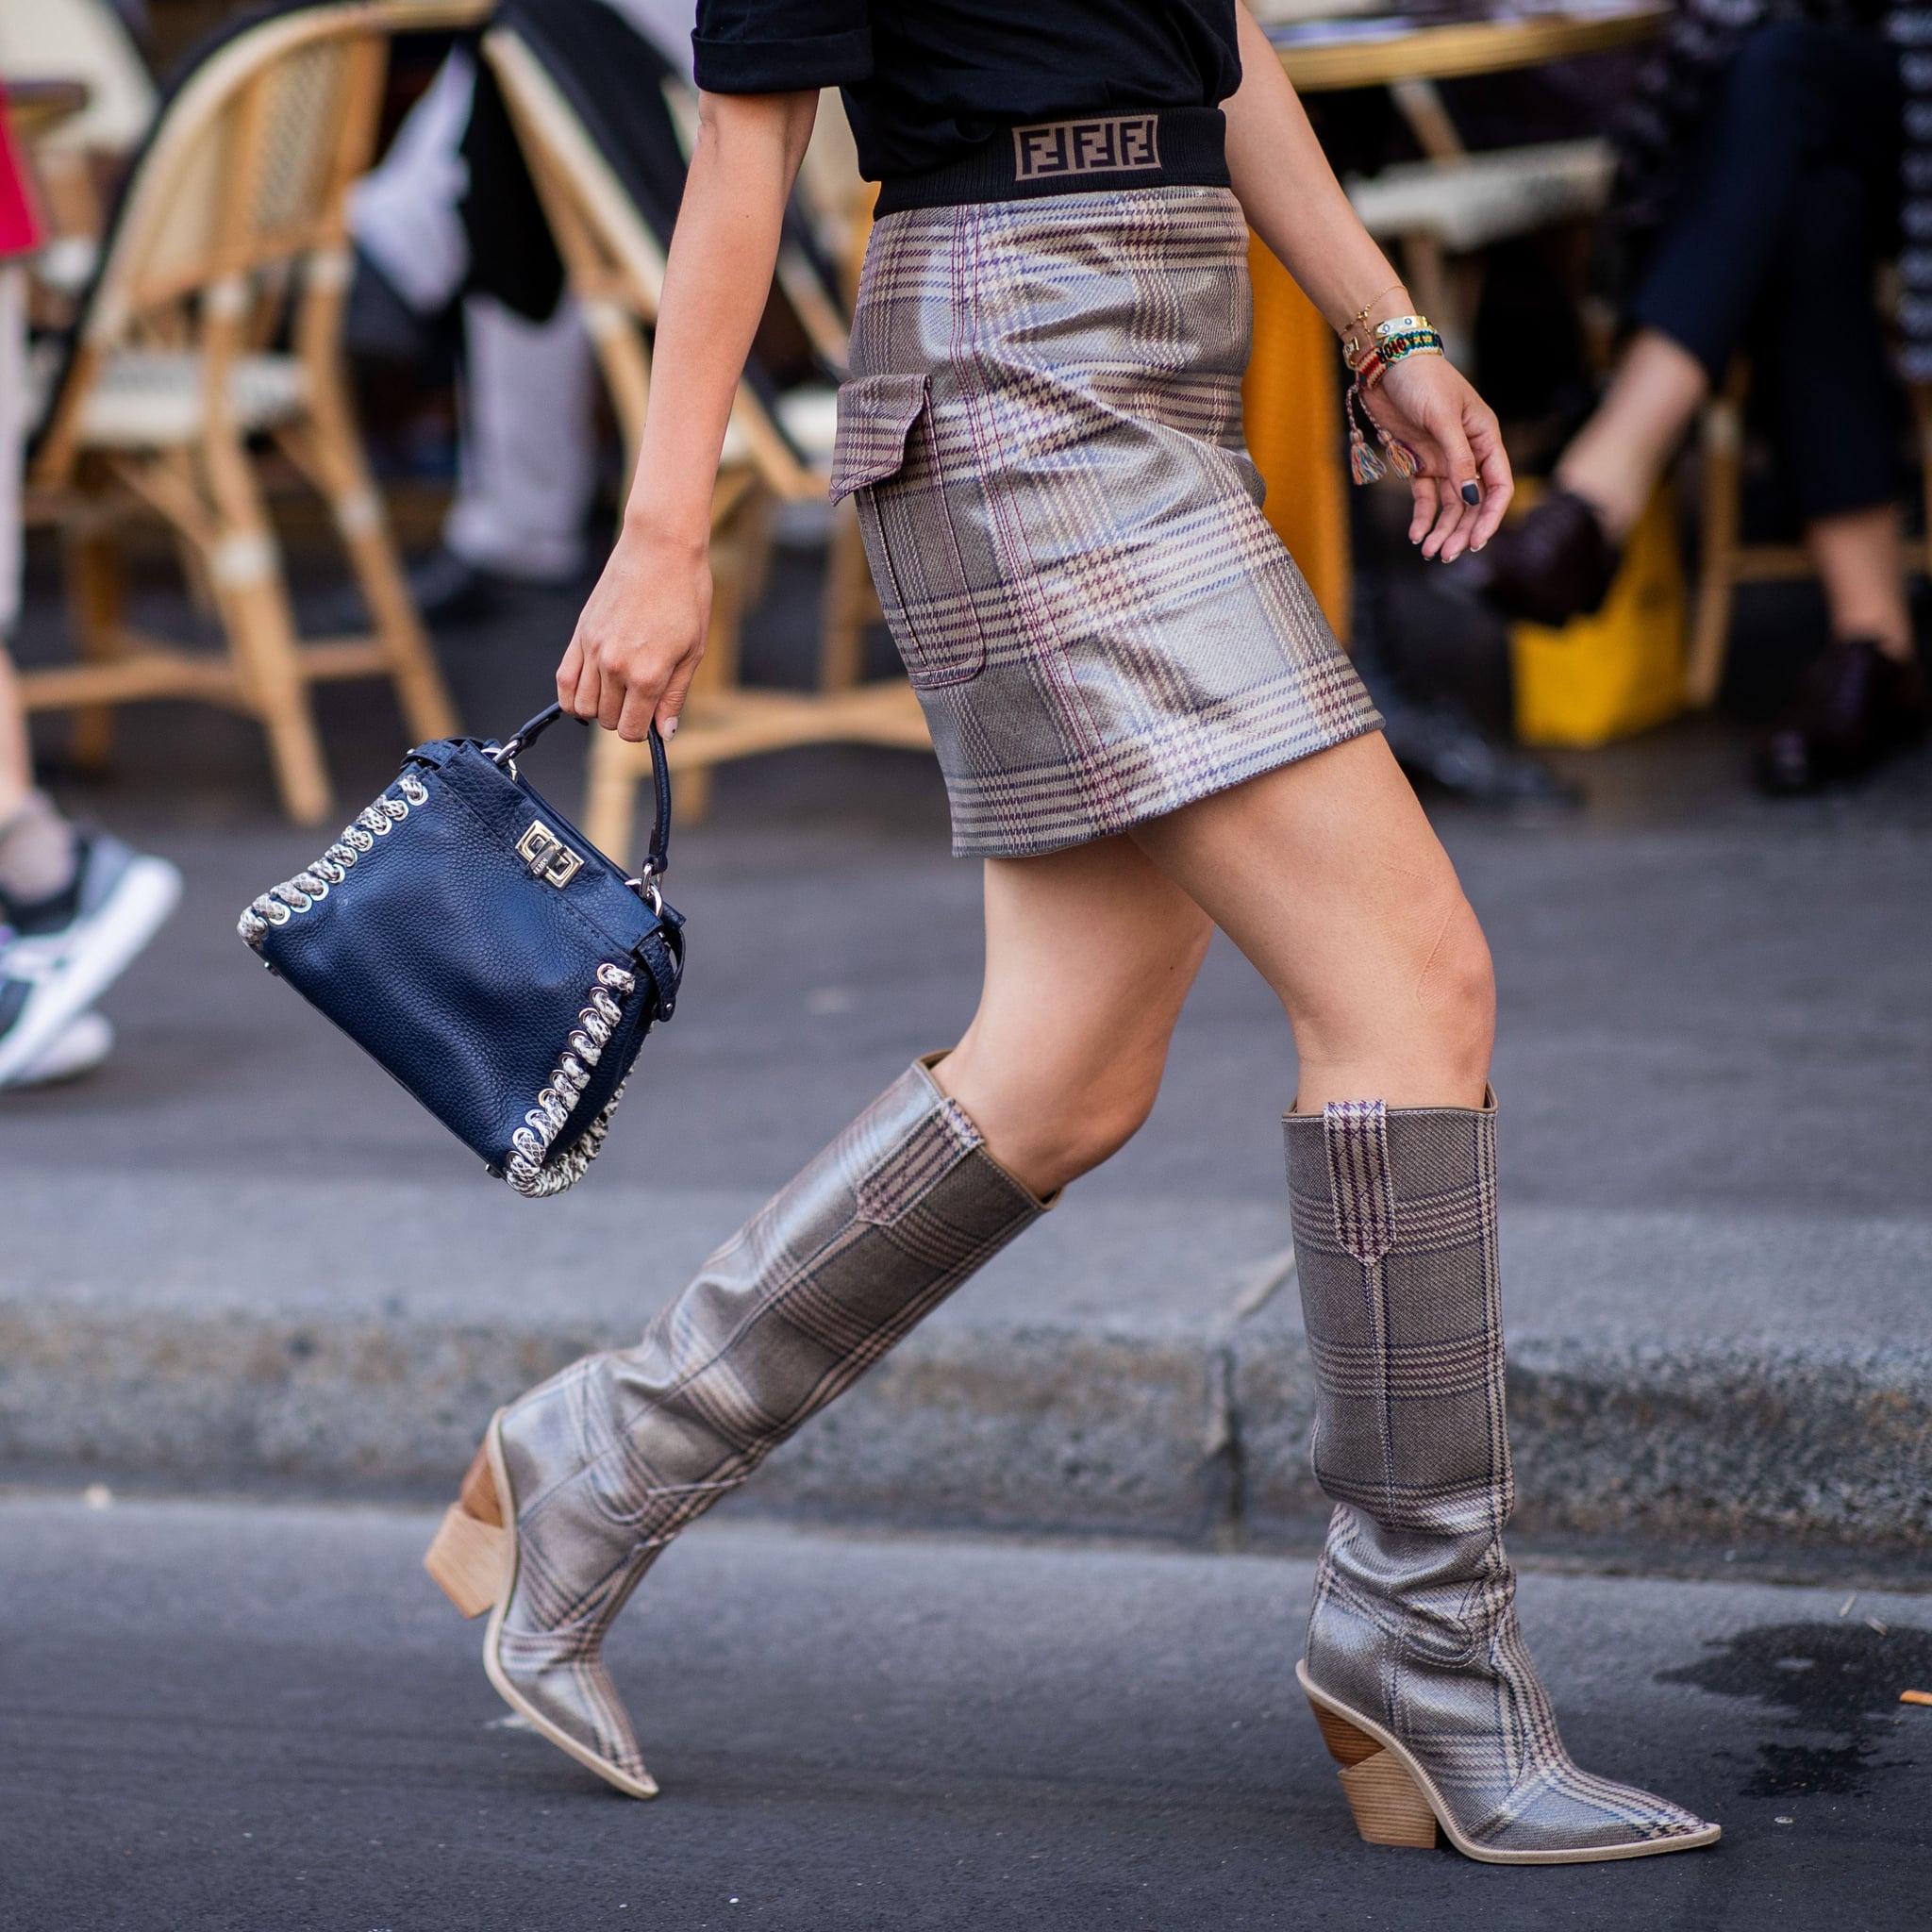 2018 fall boot trends